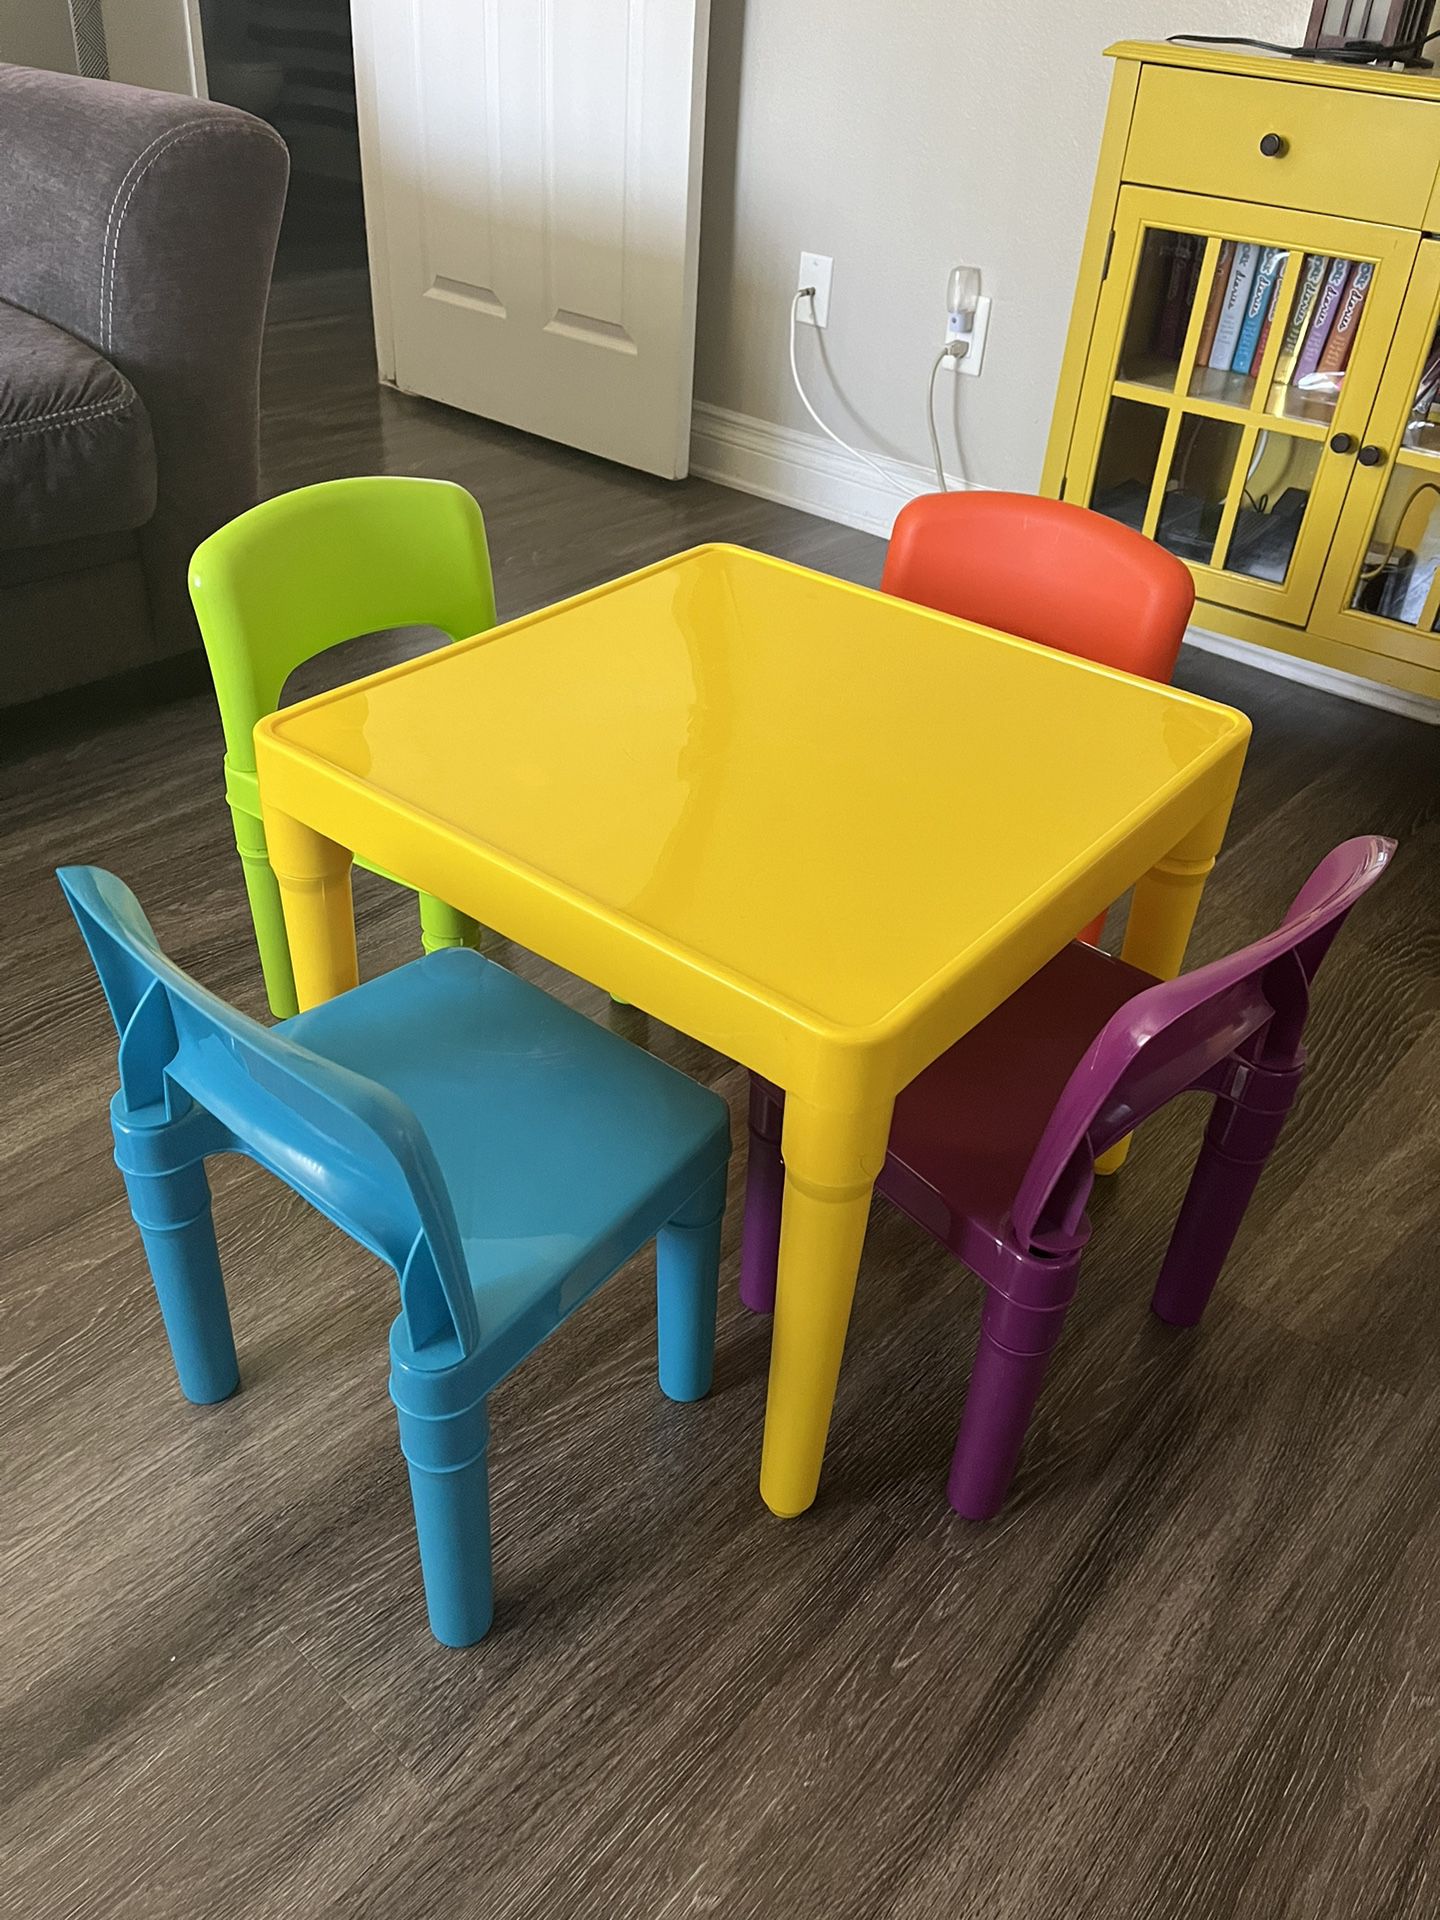 Kids Table With 4 Chair 